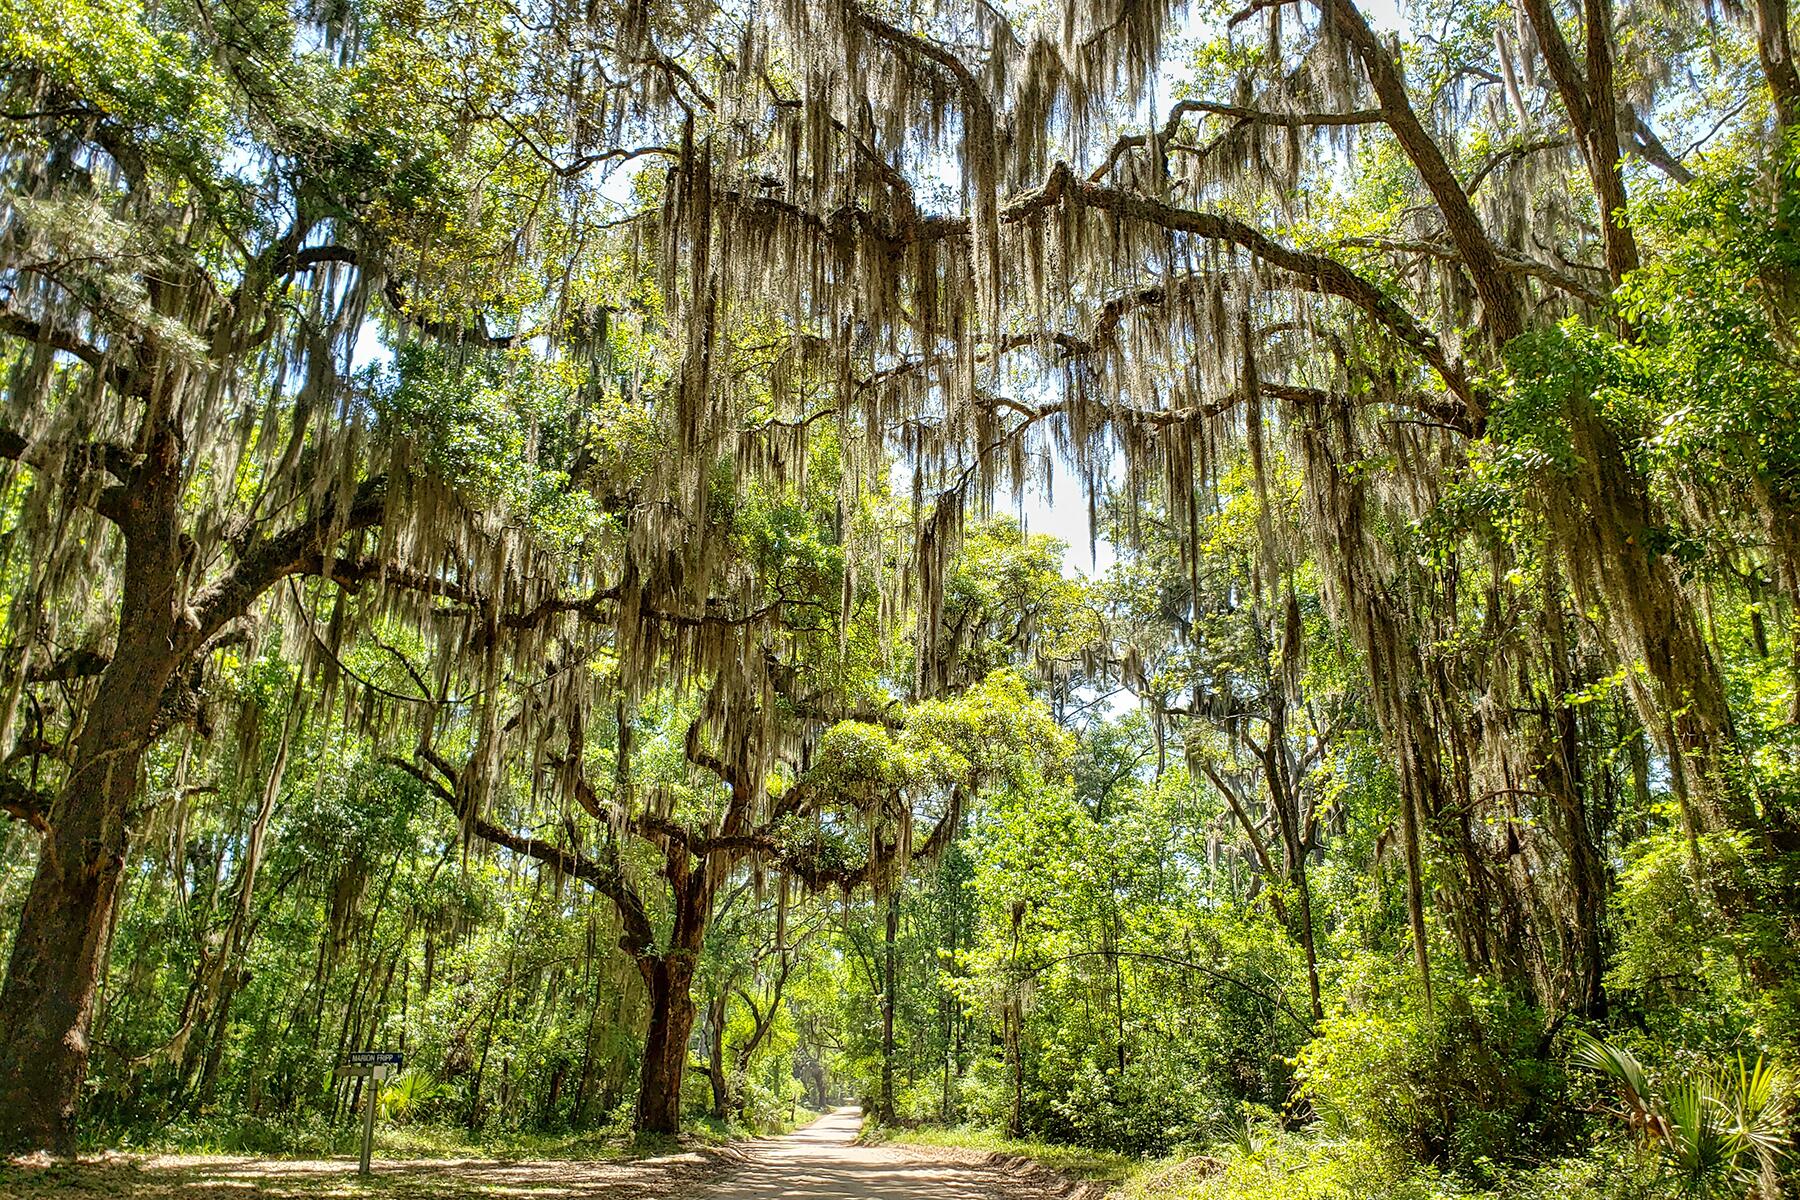 <a href='https://www.fodors.com/world/north-america/usa/south-carolina/charleston/experiences/news/photos/the-best-day-trips-to-take-from-charleston-south-carolina#'>From &quot;The 10 Best Day Trips From Charleston: Daufuskie Island&quot;</a>